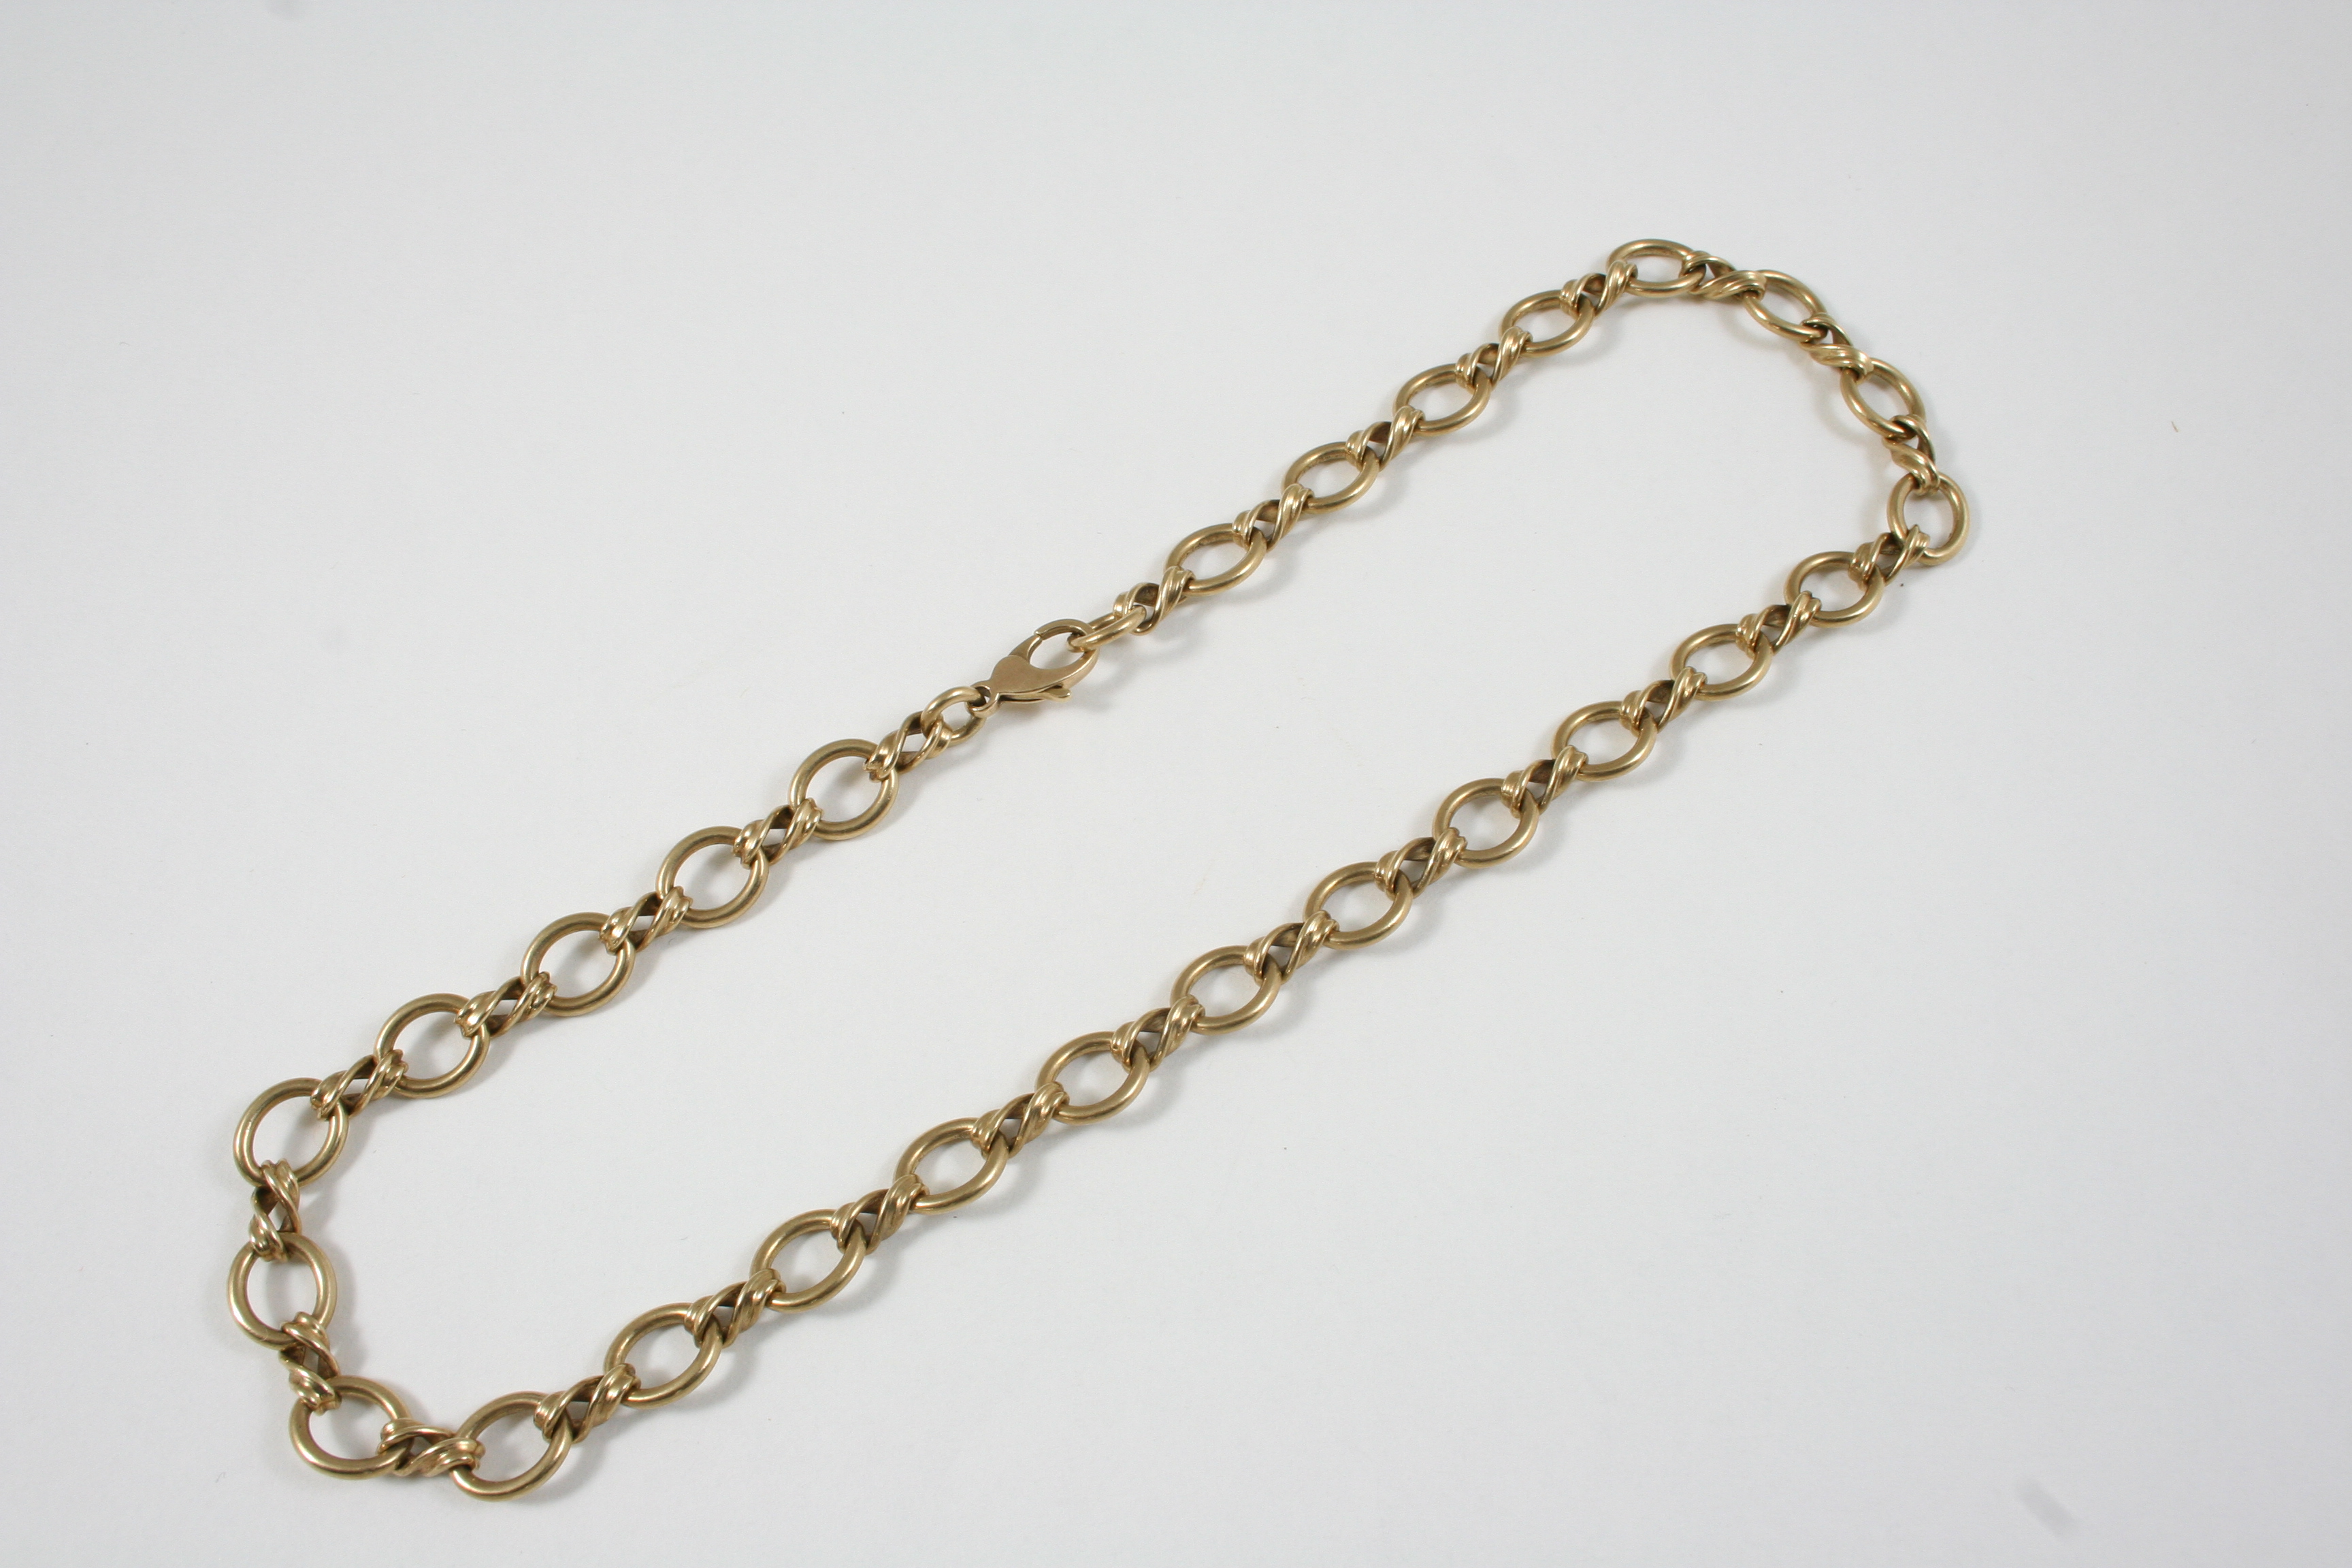 A 9CT. GOLD NECKLET formed with oval-shaped links, 41cm. long, 33 grams.